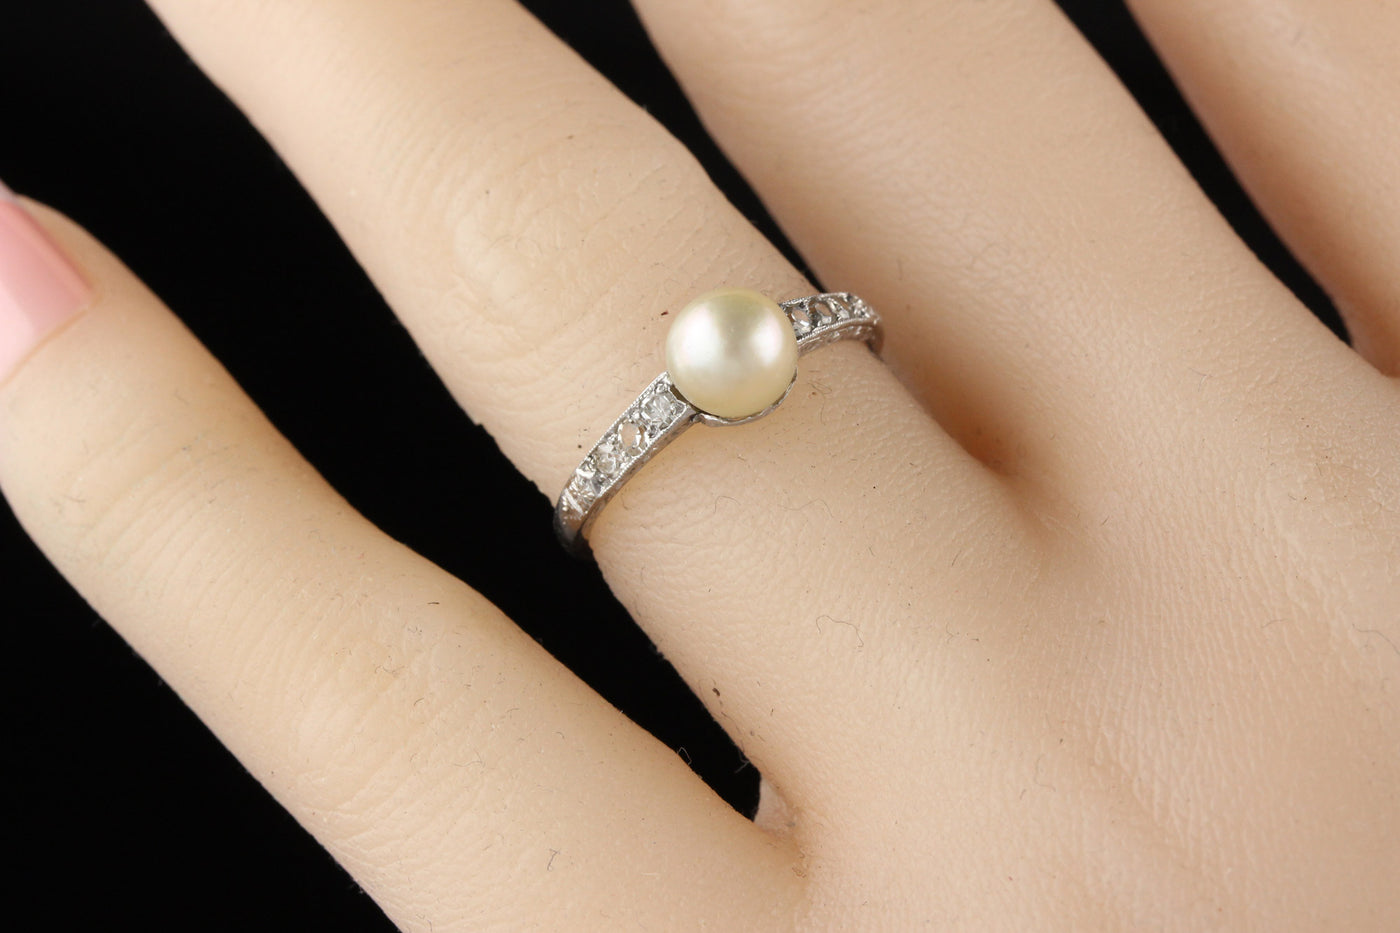 Antique Edwardian Platinum Diamond and Natural Pearl Ring